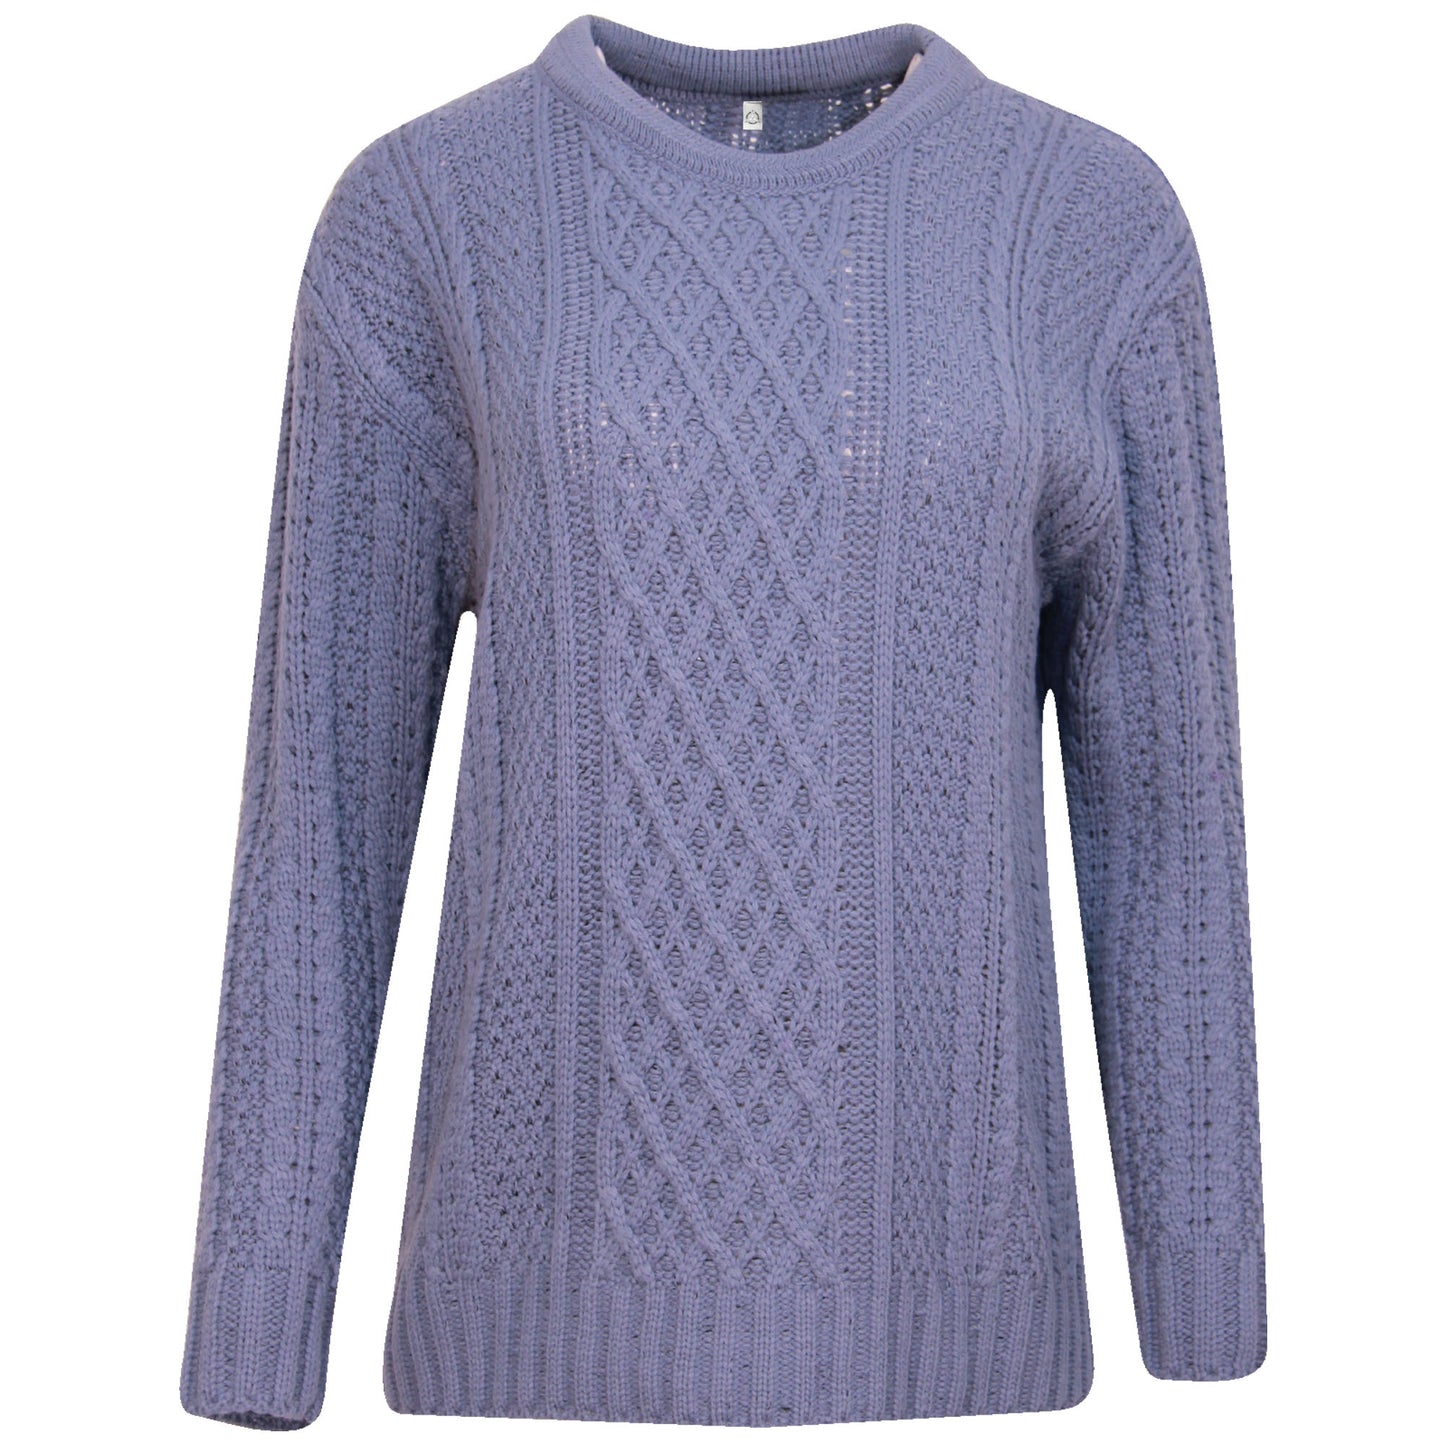 Warm and Cozy: Women's Knitted Aran Jumper for Winter